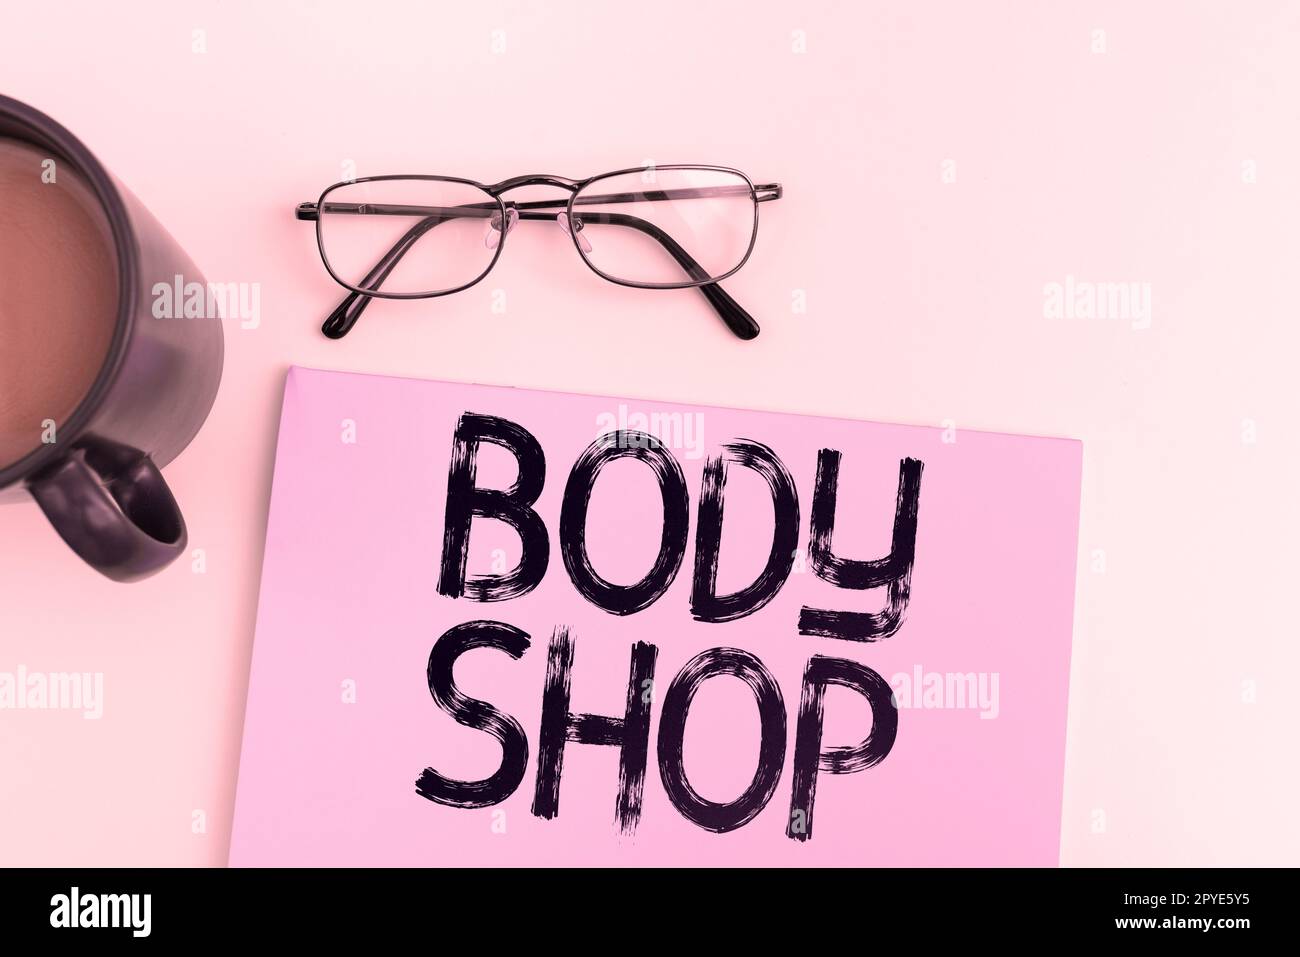 Writing displaying text Body Shop. Word Written on a shop where automotive bodies are made or repaired Stock Photo